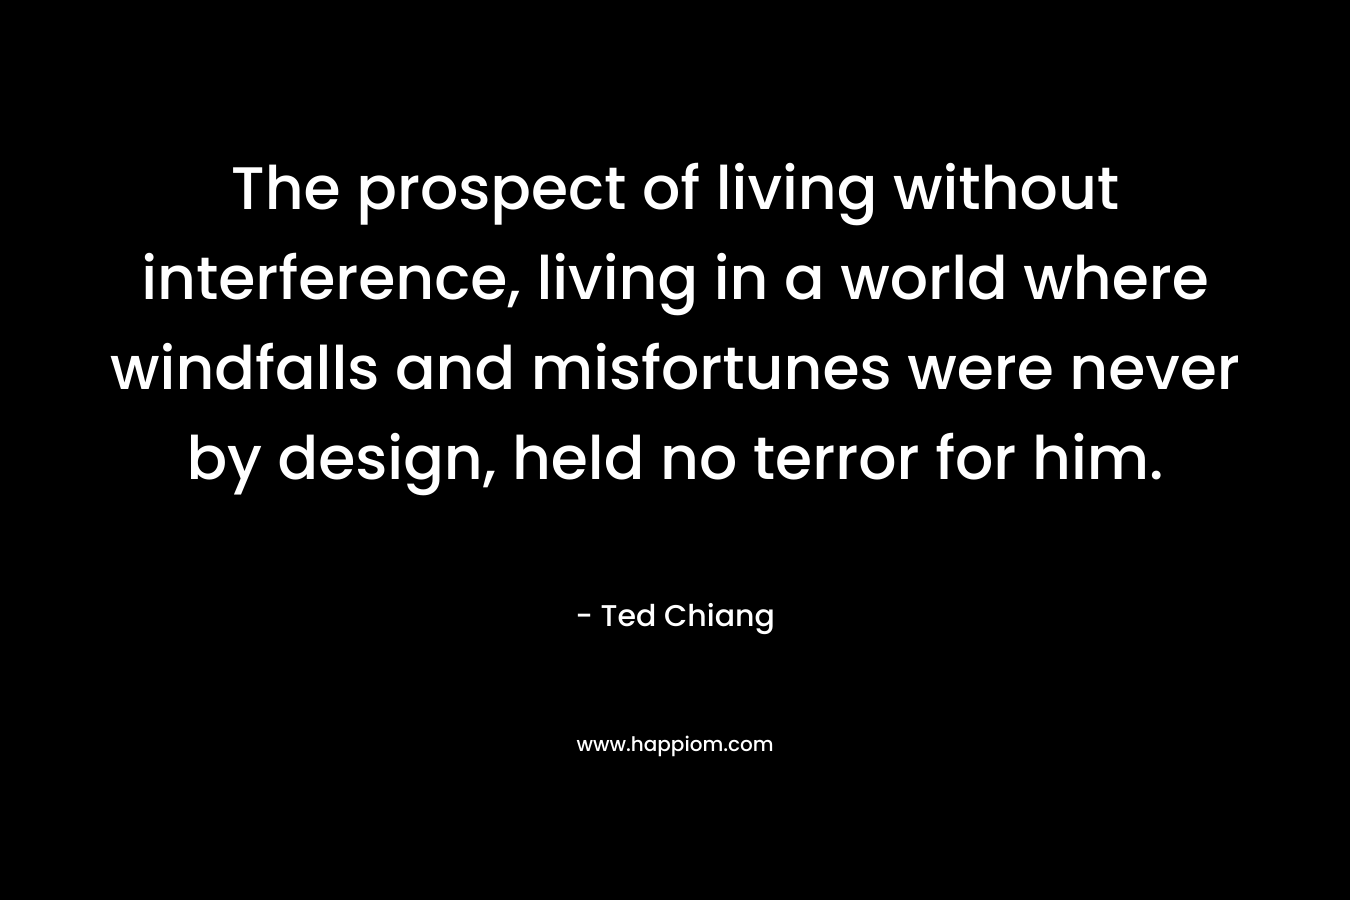 The prospect of living without interference, living in a world where windfalls and misfortunes were never by design, held no terror for him. – Ted Chiang